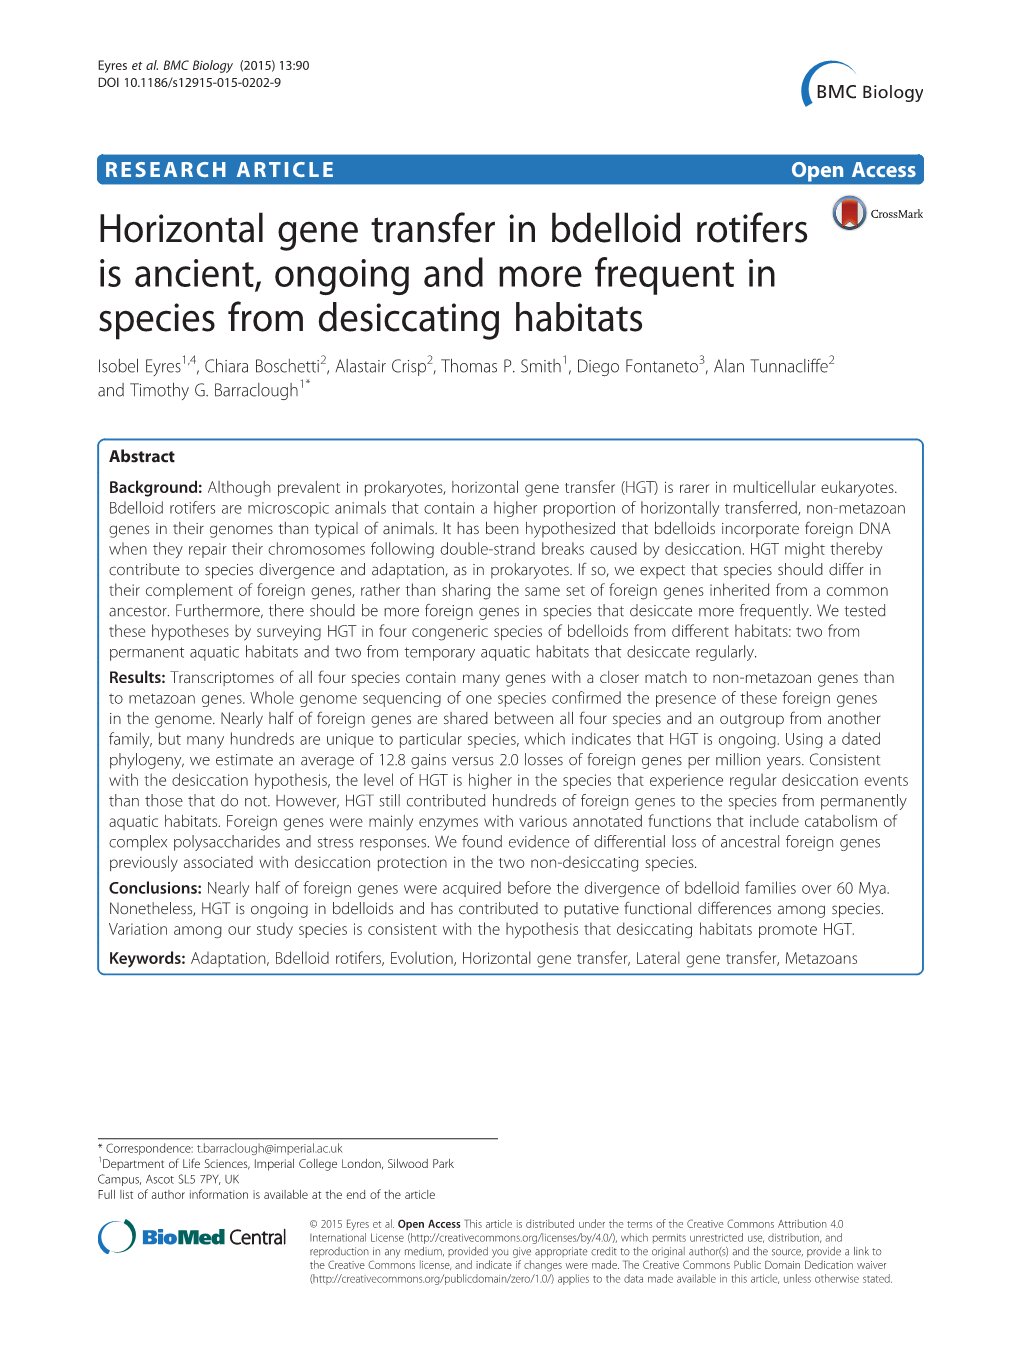 Horizontal Gene Transfer in Bdelloid Rotifers Is Ancient